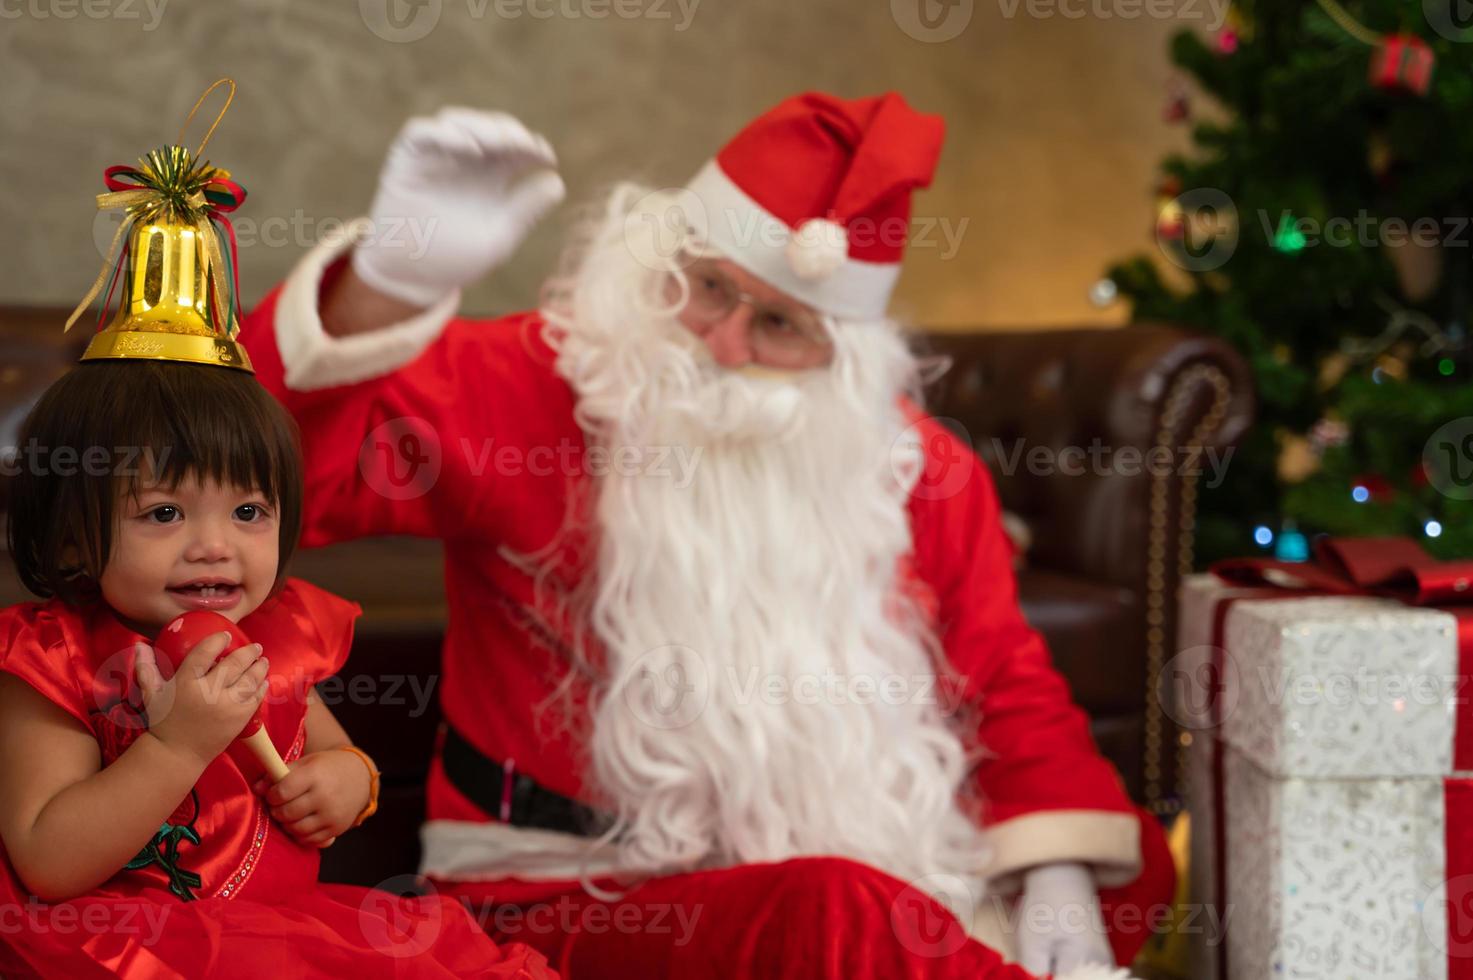 Little kid girl siiting together   with Santa claus on floor.  Celebrate holiday Christmas and Thanksgiving party. photo